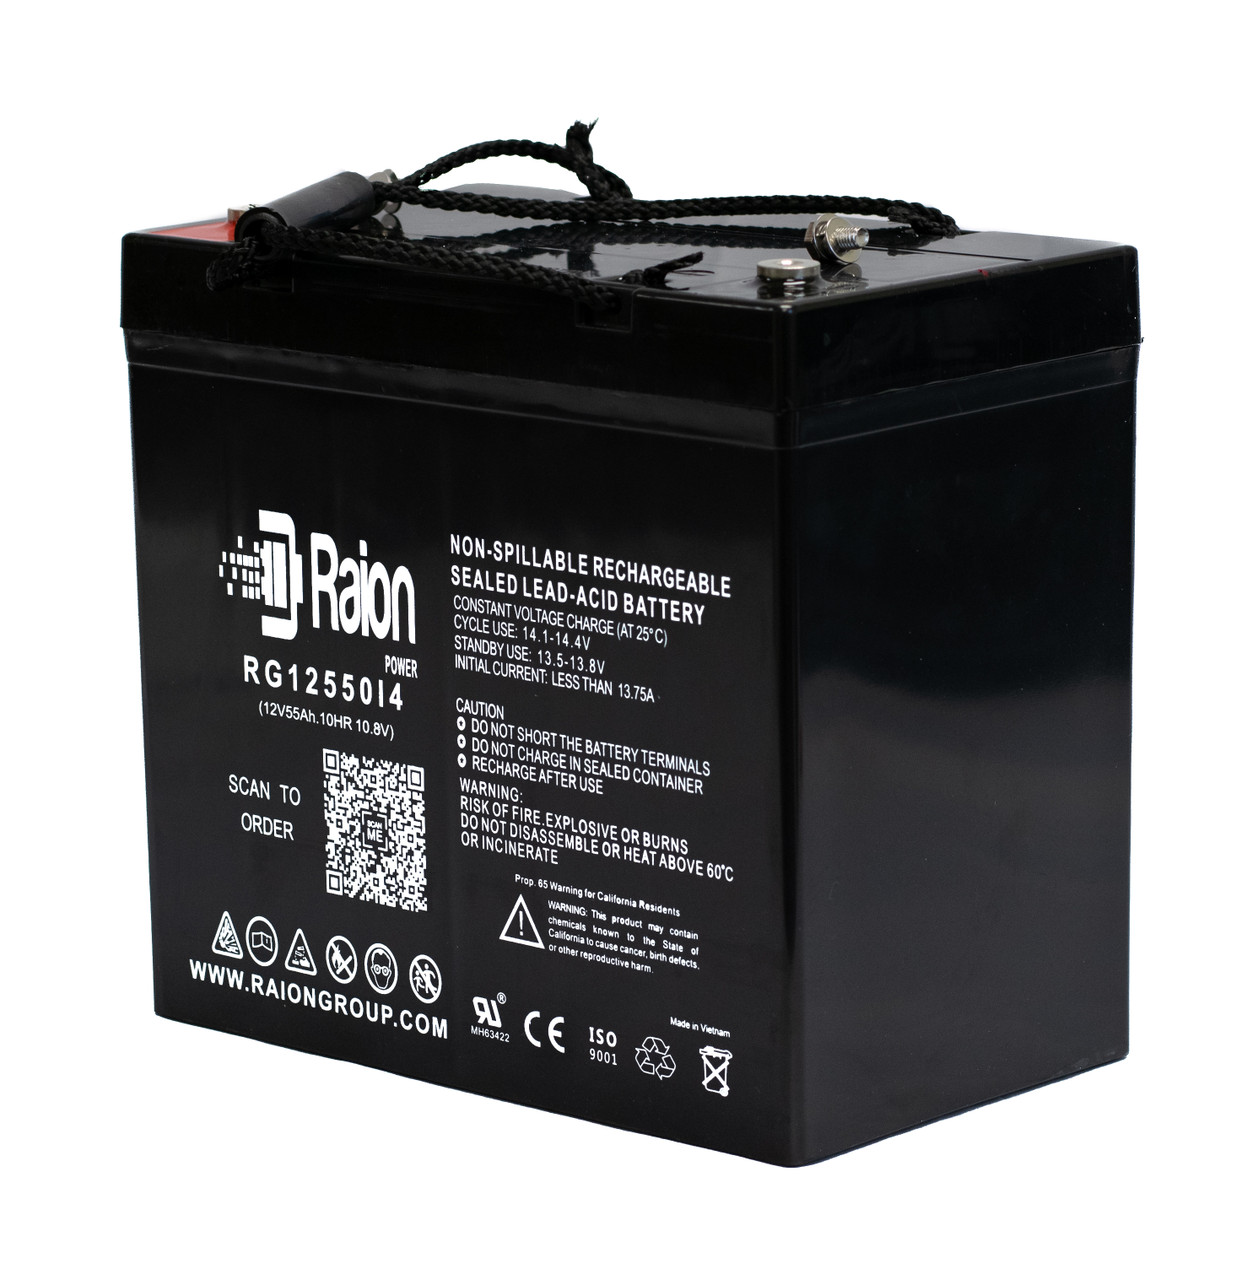 Raion Power 12V 55Ah 22NF Mobility Scooter Battery Replacement for Quantum Rehab Q6000Z